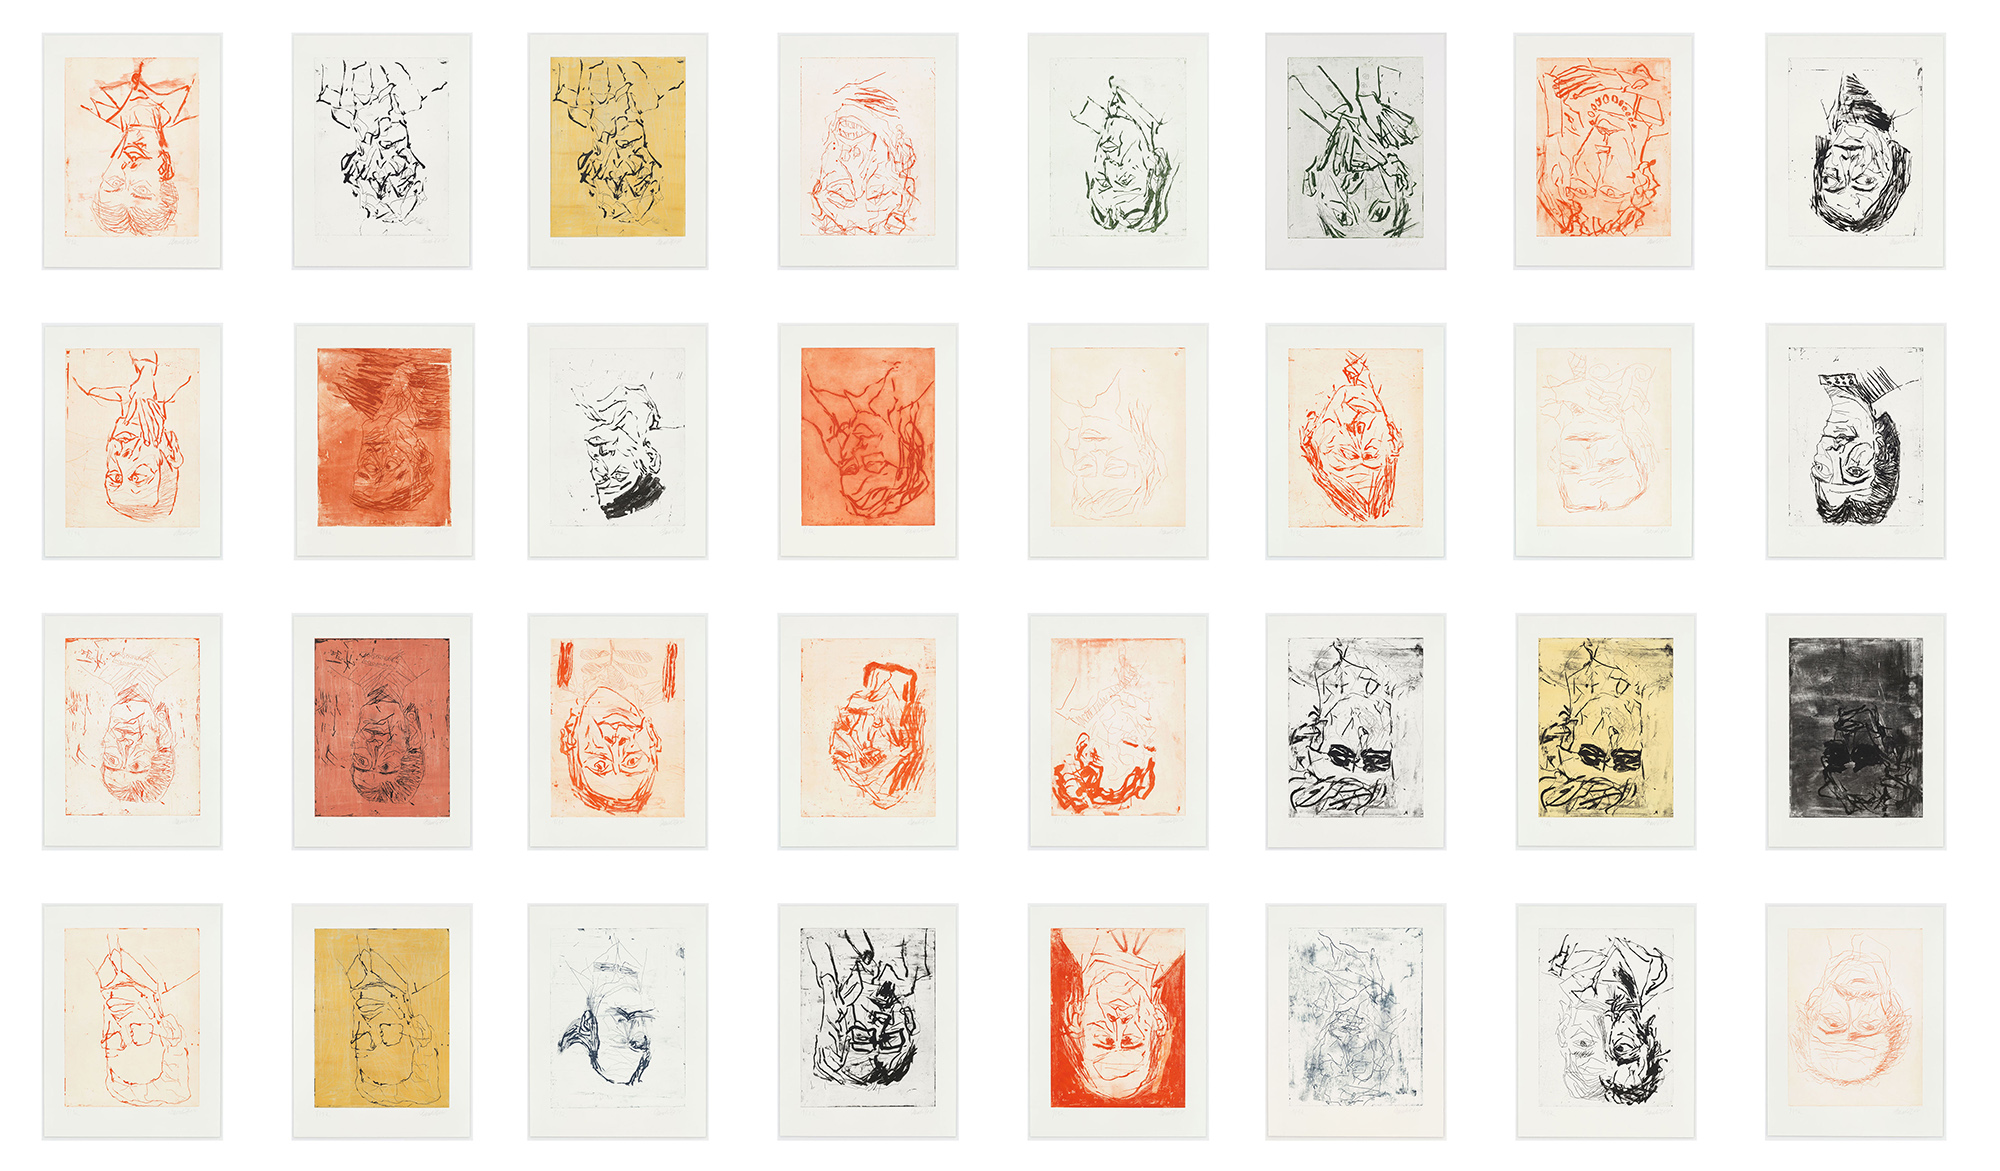 George Baselitz grid of portraits in a variety of colors